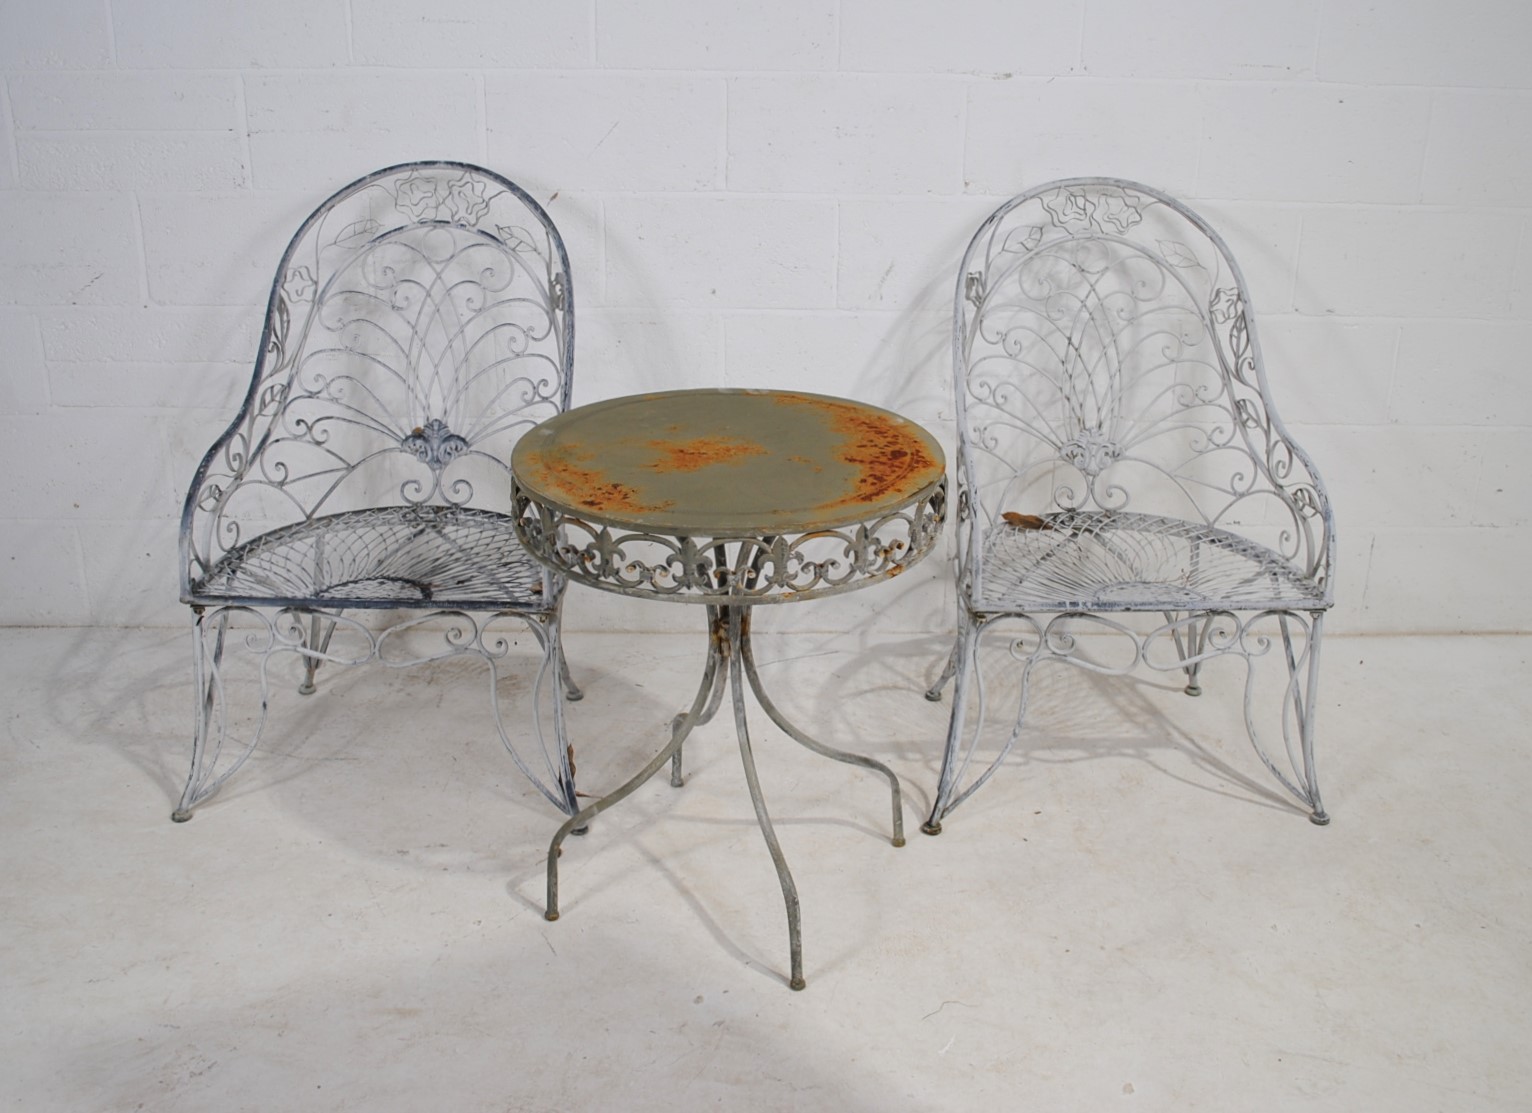 A weathered metal garden bistro table with two chairs